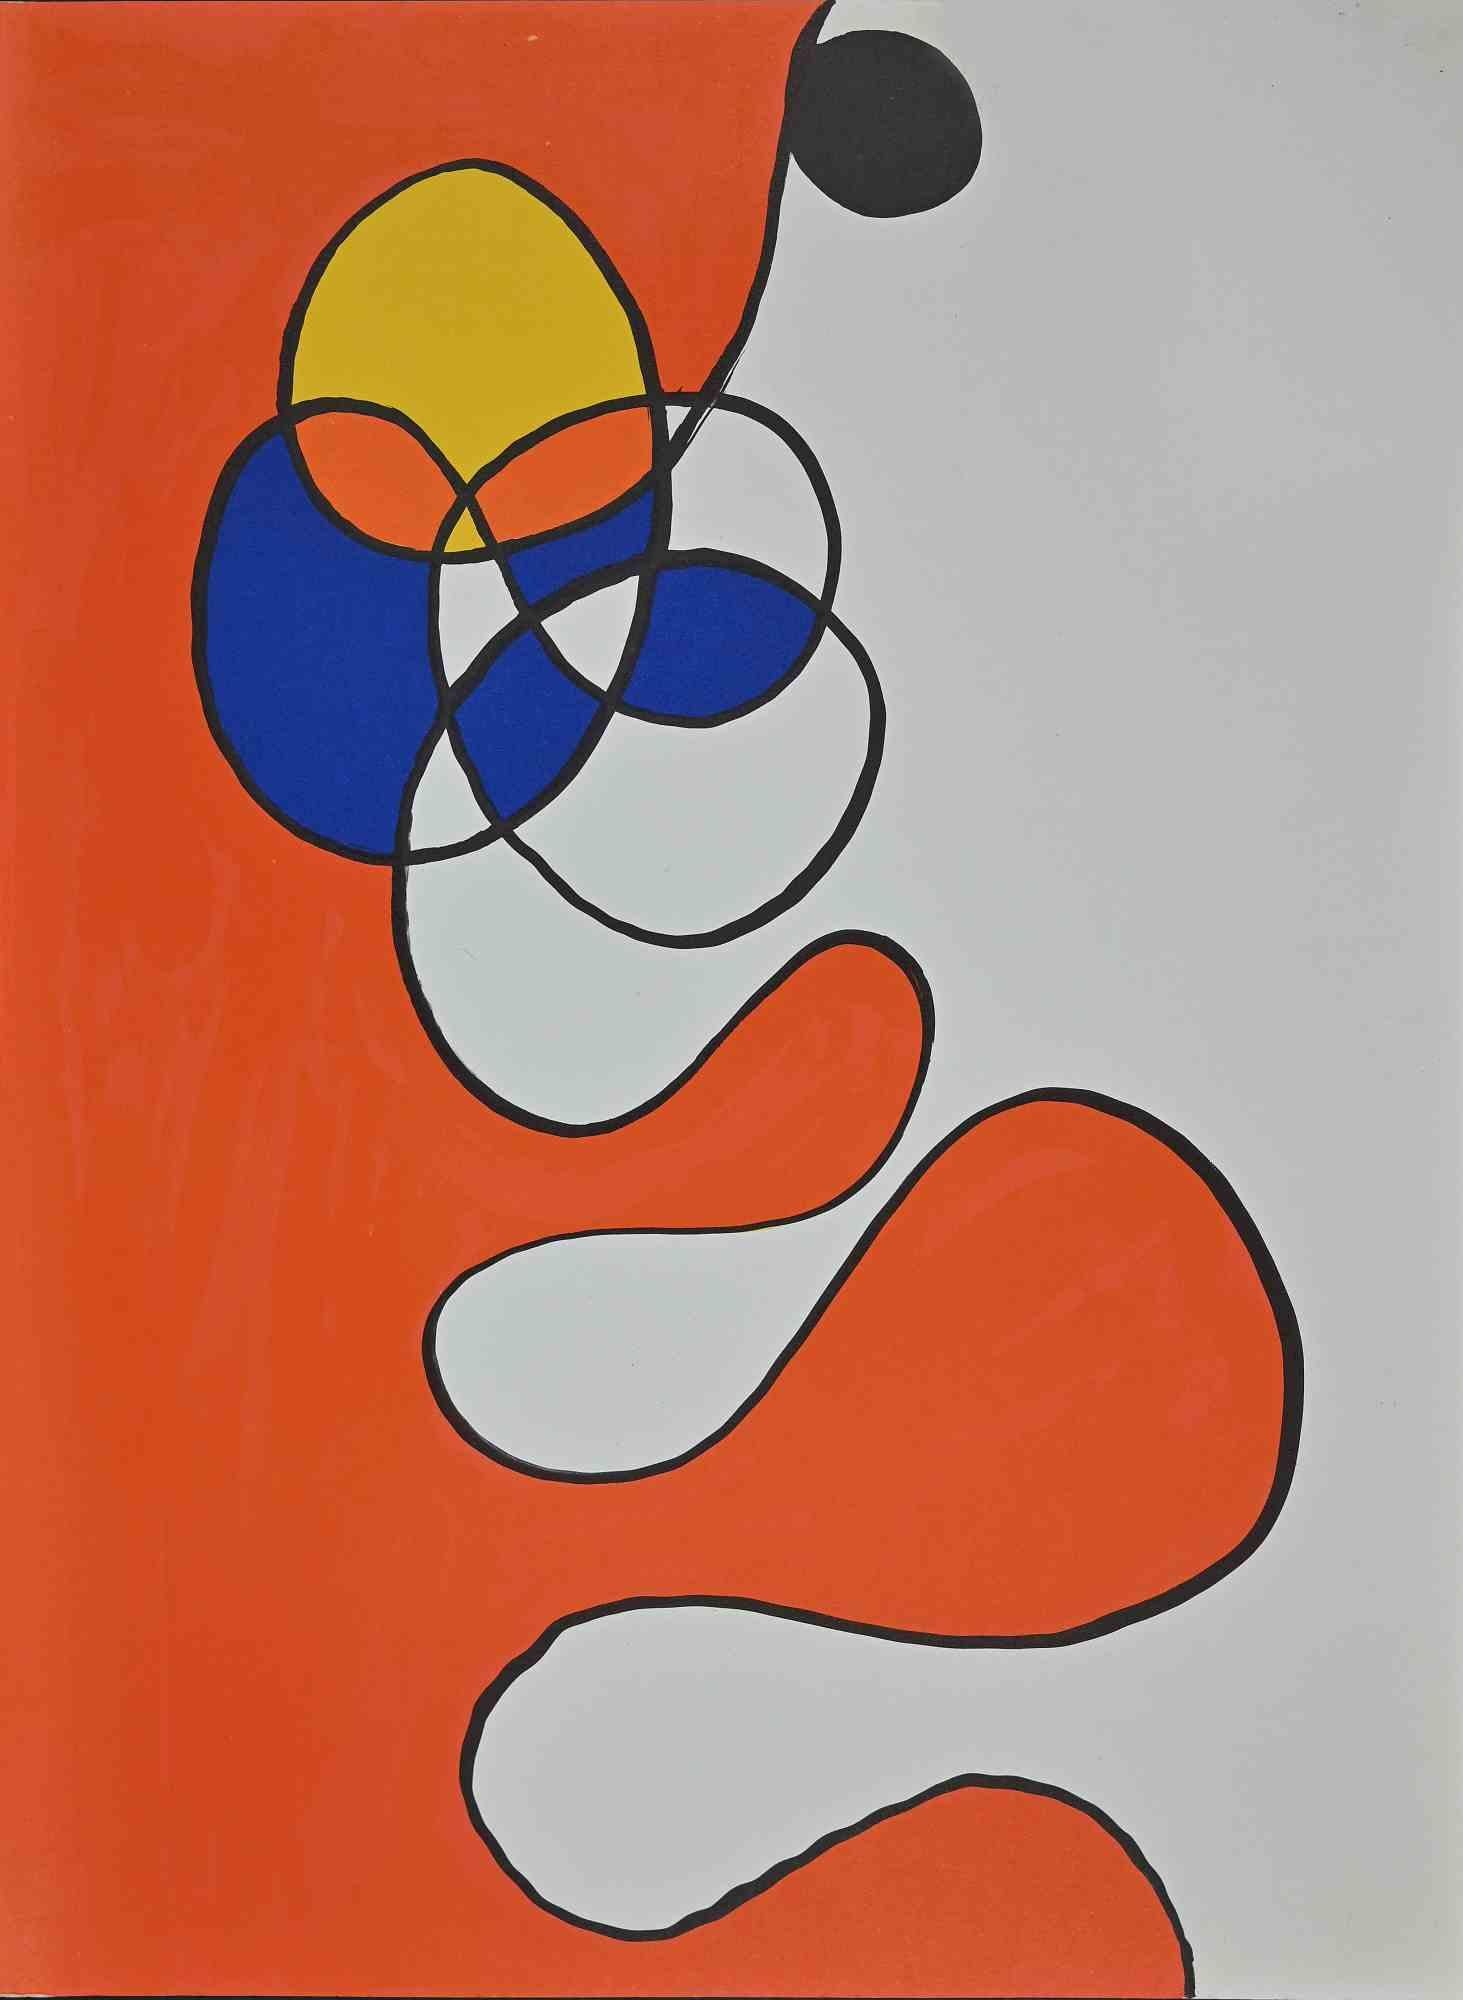 Abstract Composition is an original artwork realized by Alexander Calder for the French art magazine "Derrière Le Miroir" no. 173, 1968.

Original mixed colored lithograph. 

Printed by Ateliers de Maeght, Paris, 1968.

Good conditions except for